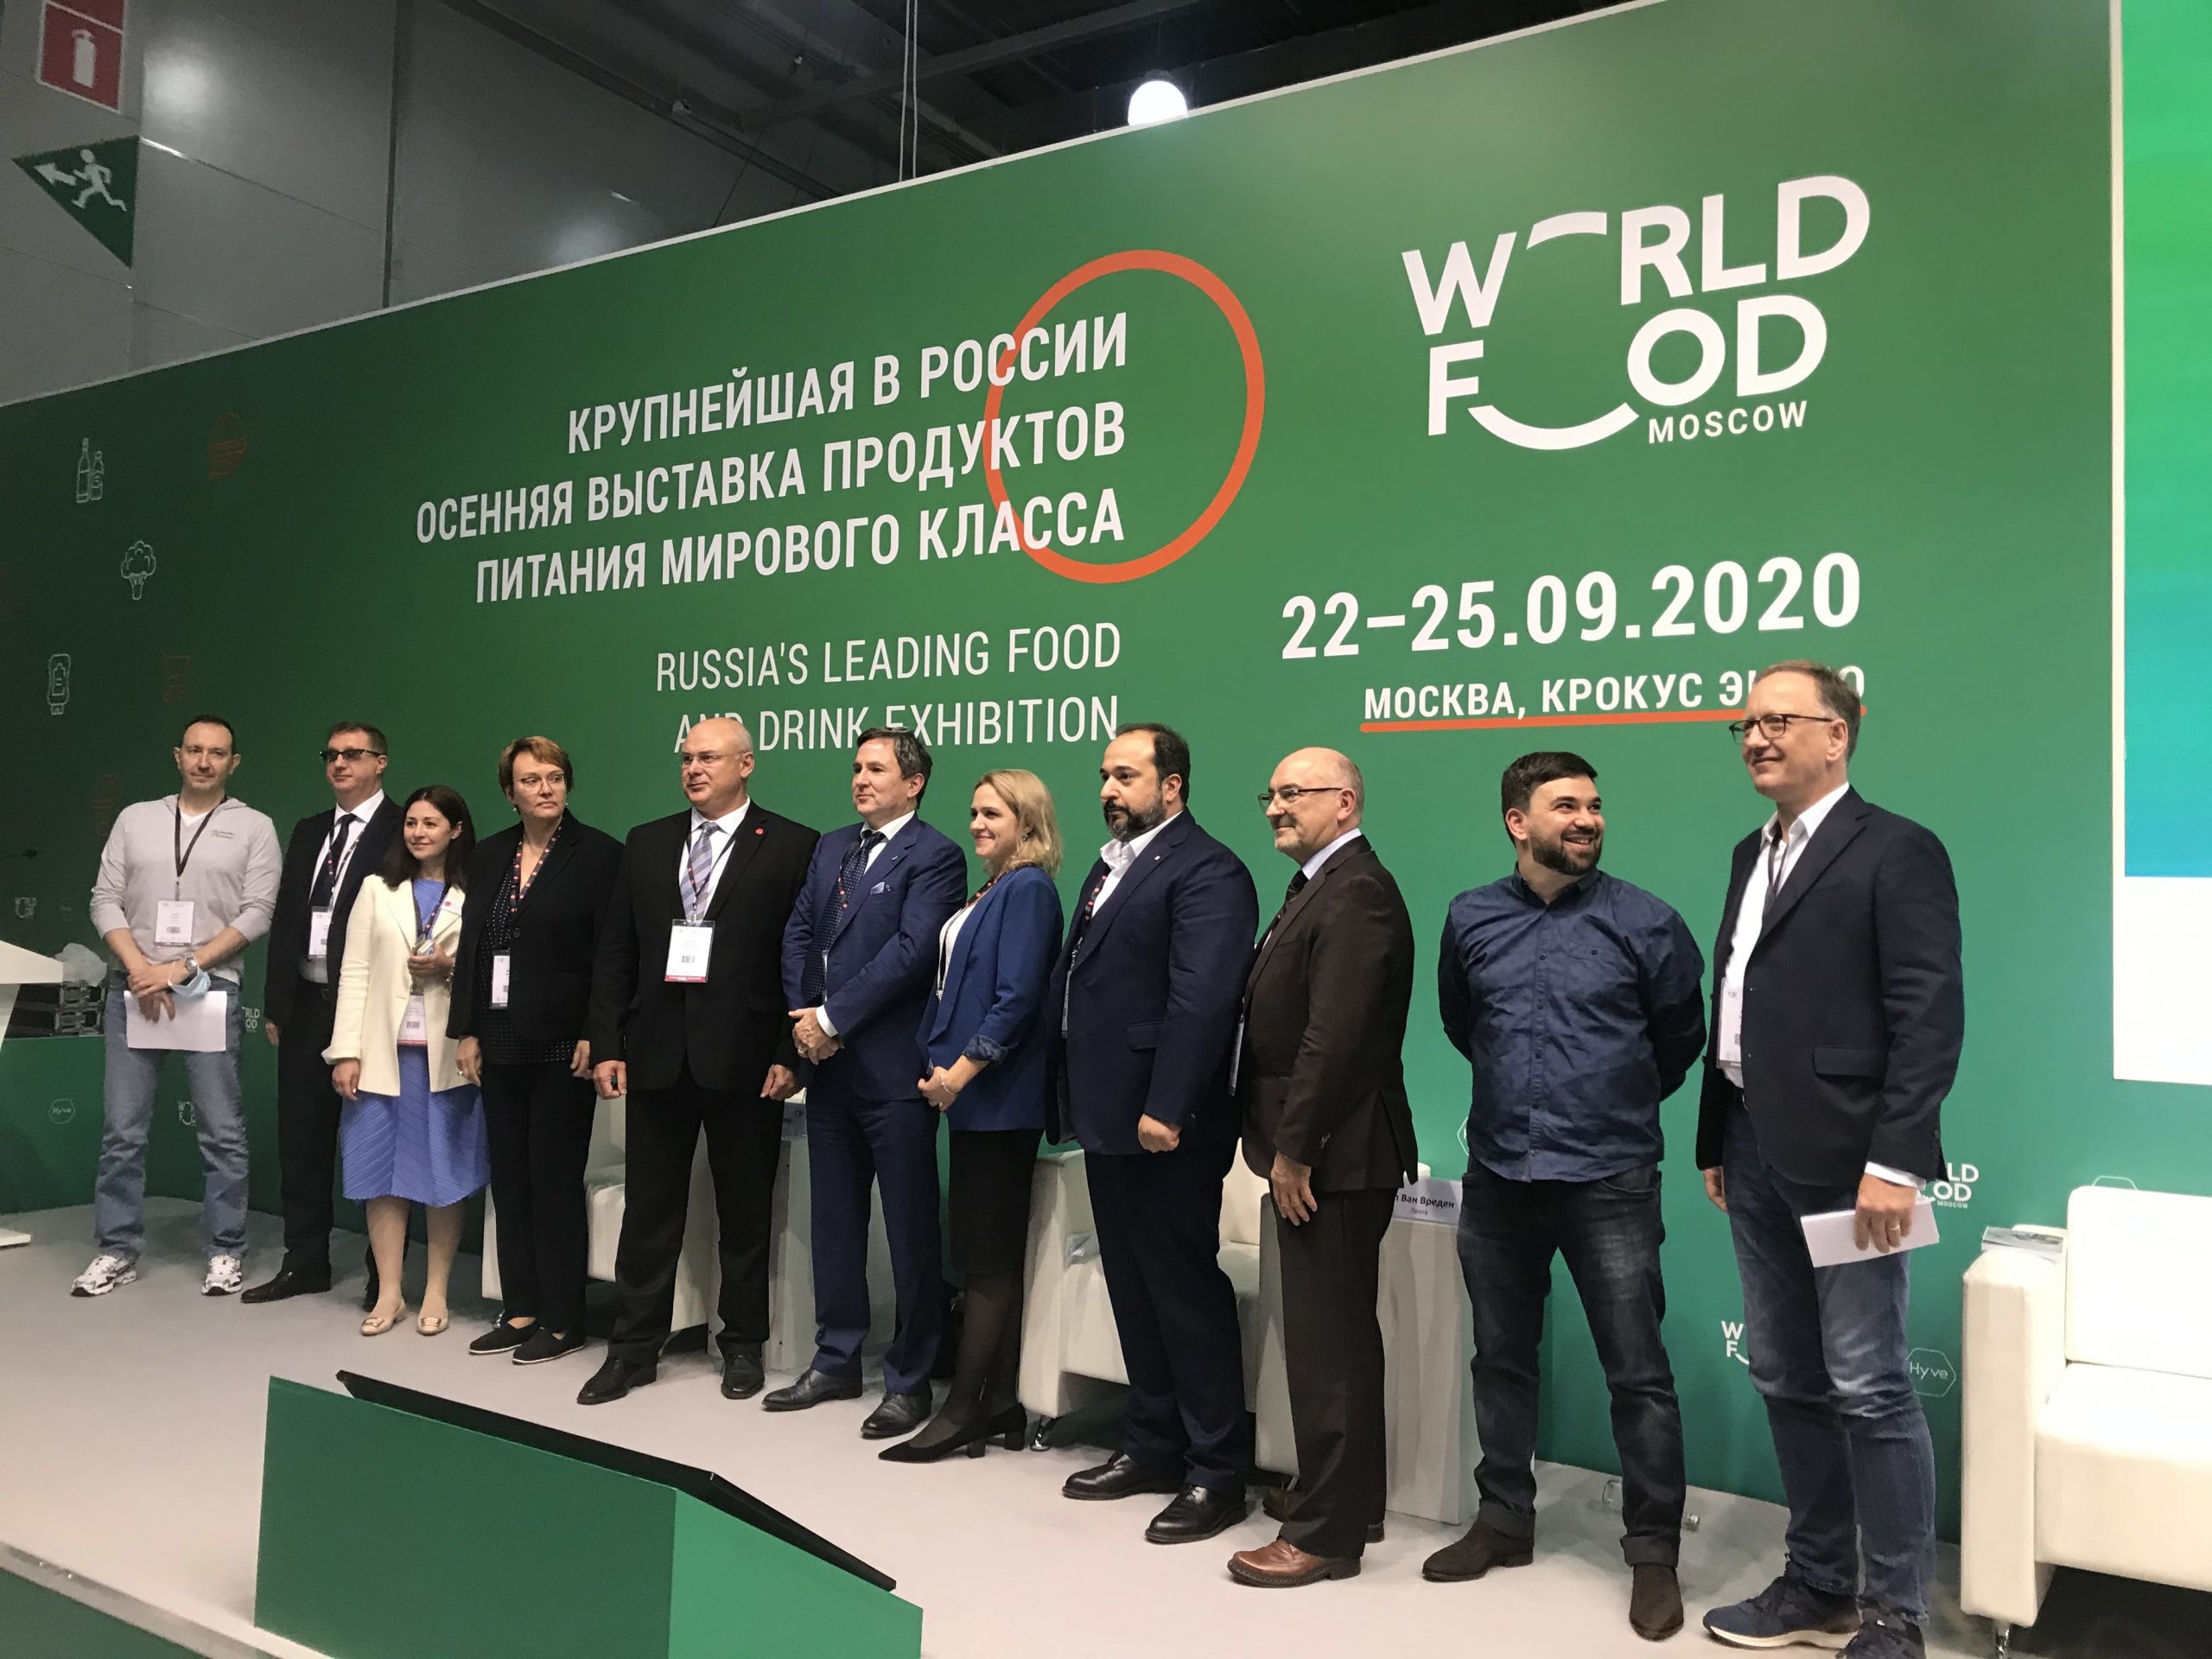 World Food Moscow, positive results